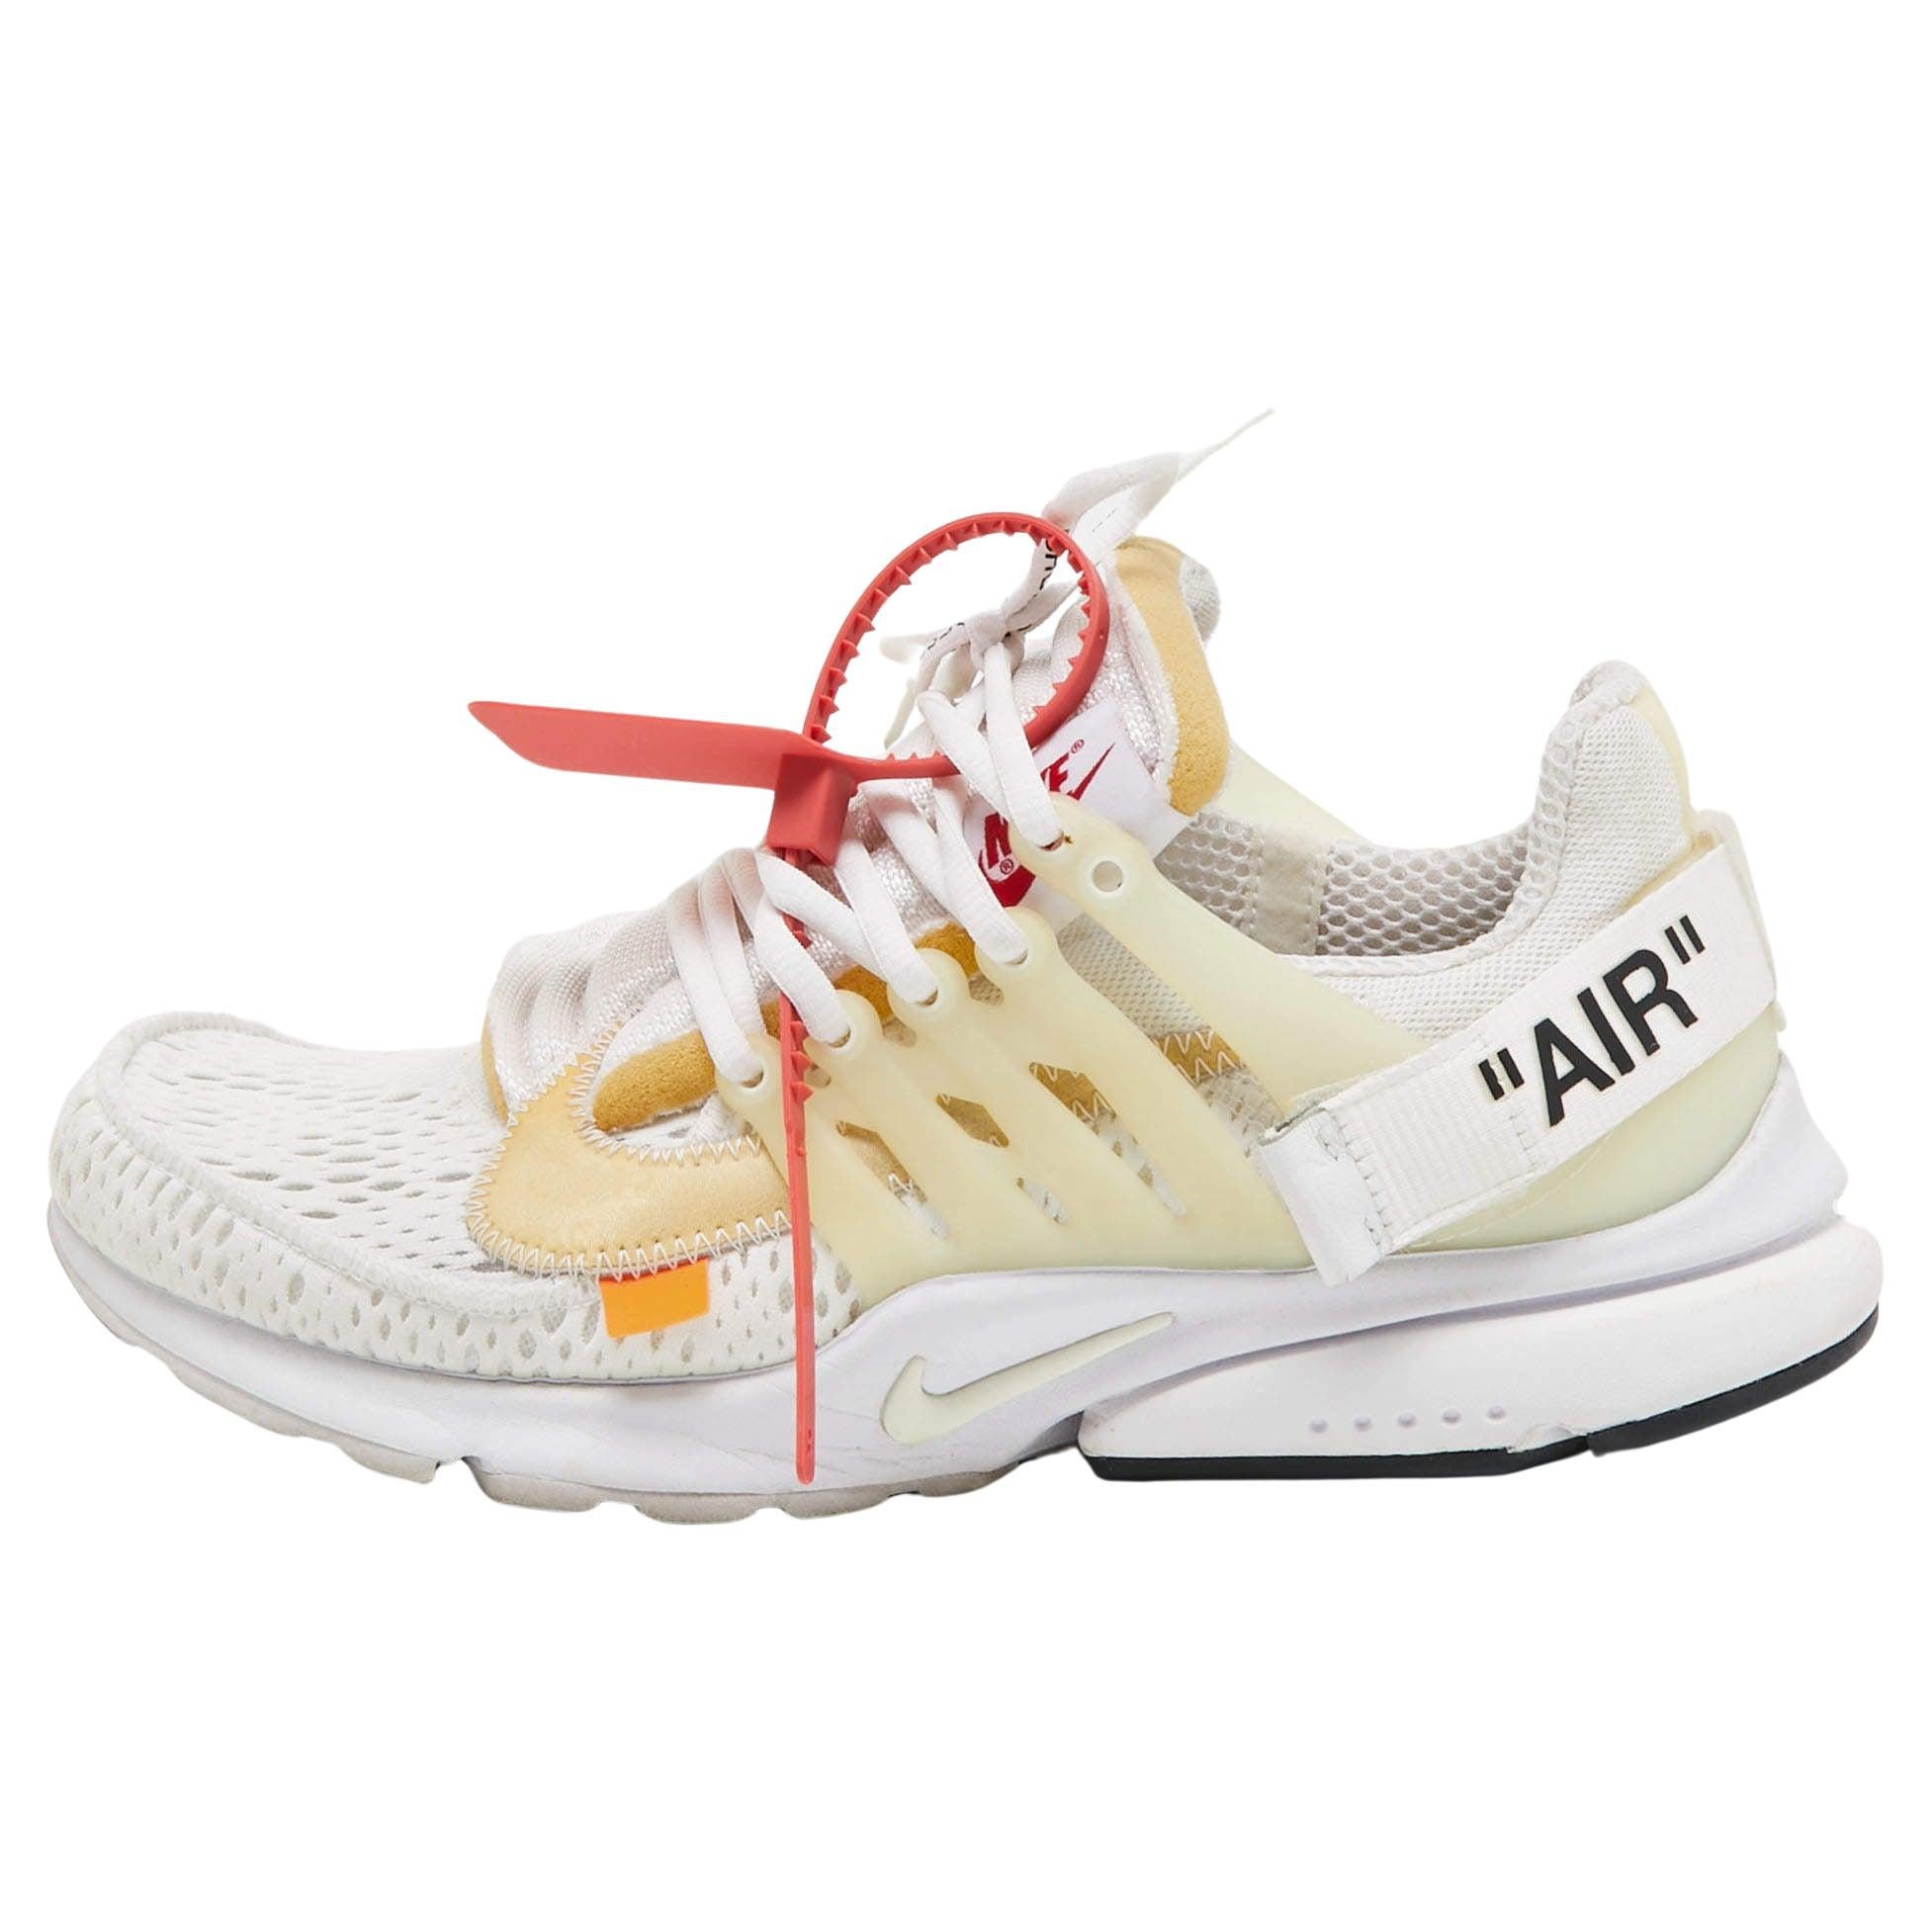 Nike x Off White White Fabric Air Presto Low Trainers Sneakers Size 42.5